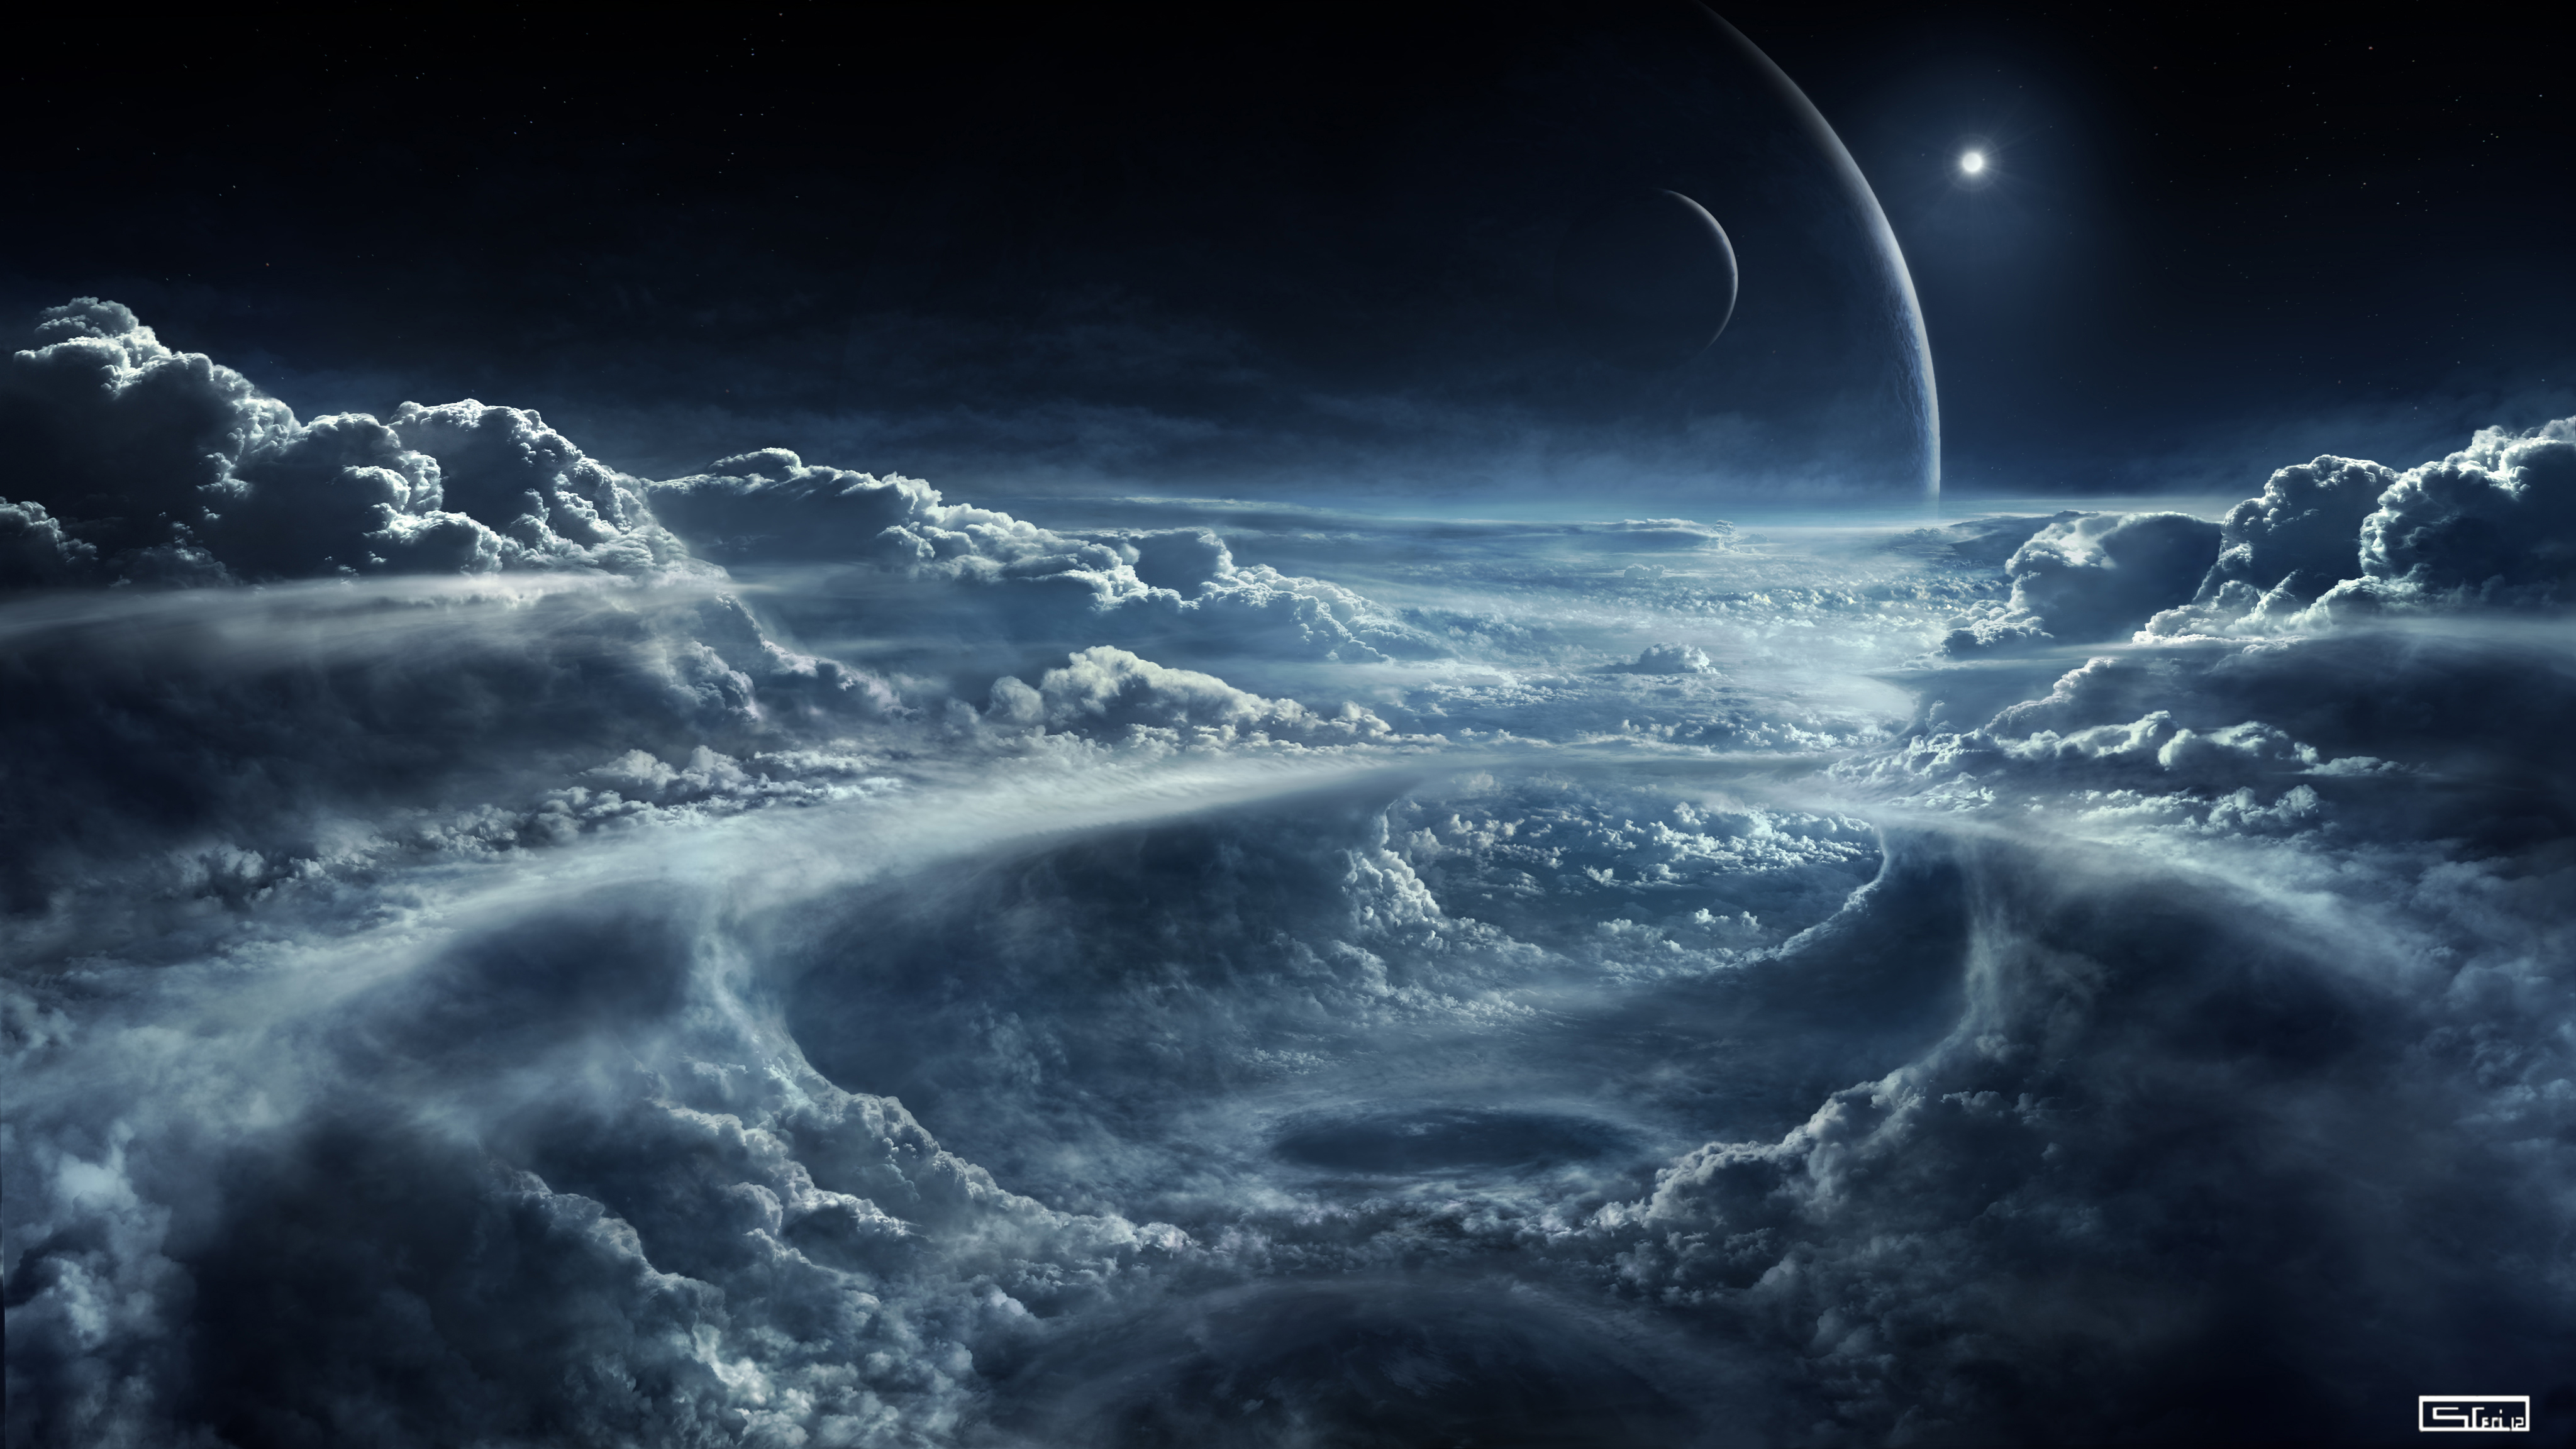 4K Space and Clouds Wallpaper 4K Wallpaper   Ultra HD 4K Wallpapers